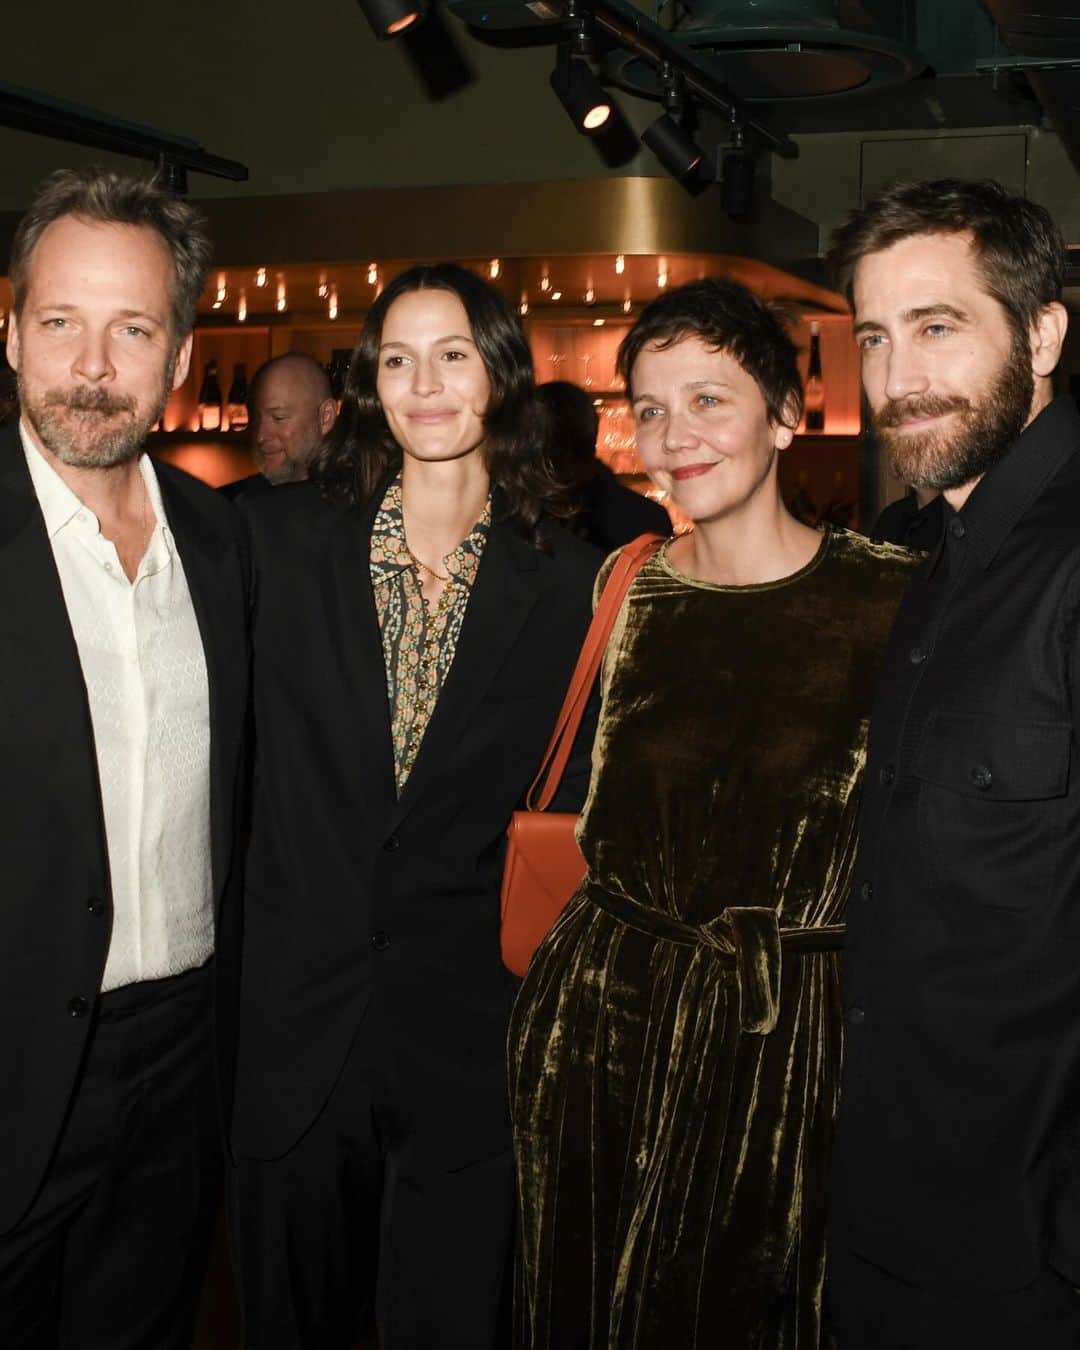 Just Jaredのインスタグラム：「Jake Gyllenhaal & girlfriend Jeanne Cadieu joined his sister Maggie Gyllenhaal & husband Peter Sarsgaard at a special screening of Peter’s new movie “Memory.” Peter’s co-star Jessica Chastain & director Michel Franco were also in attendance. #JakeGyllenhaal #JeanneCadieu #MaggieGyllenhaal #PeterSarsgaard #JessicaChastain #MichelFranco Photos: David Benthal/BFA.com」